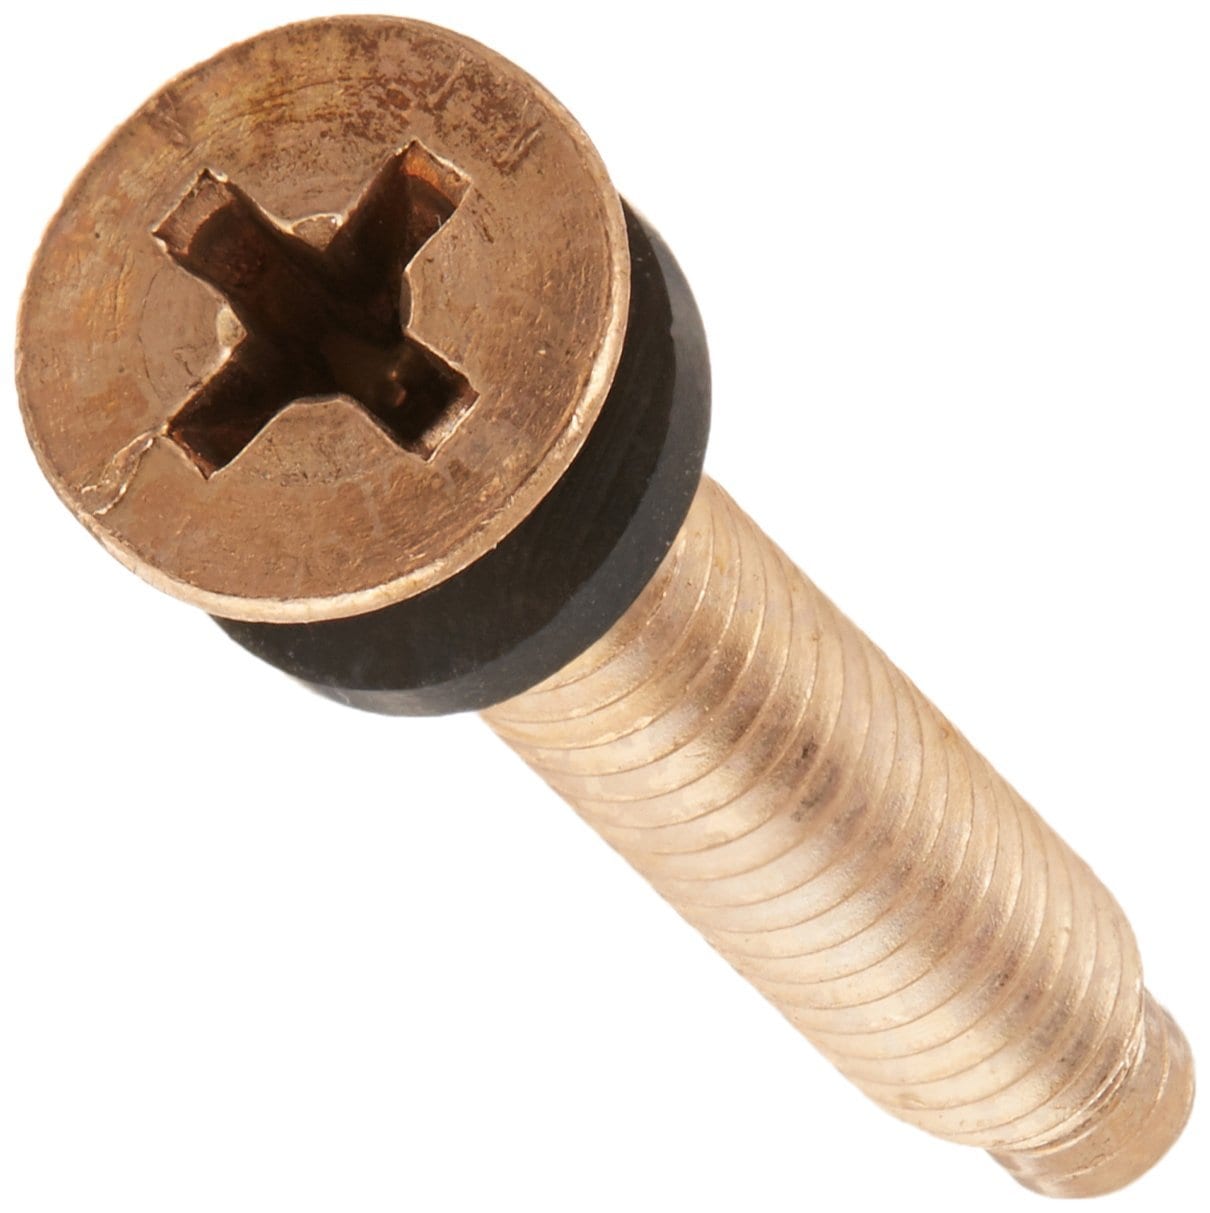 Pentair 79104800 Brass Pilot Screw with Captive Gum Washer Replacement for Pool and Spa Light